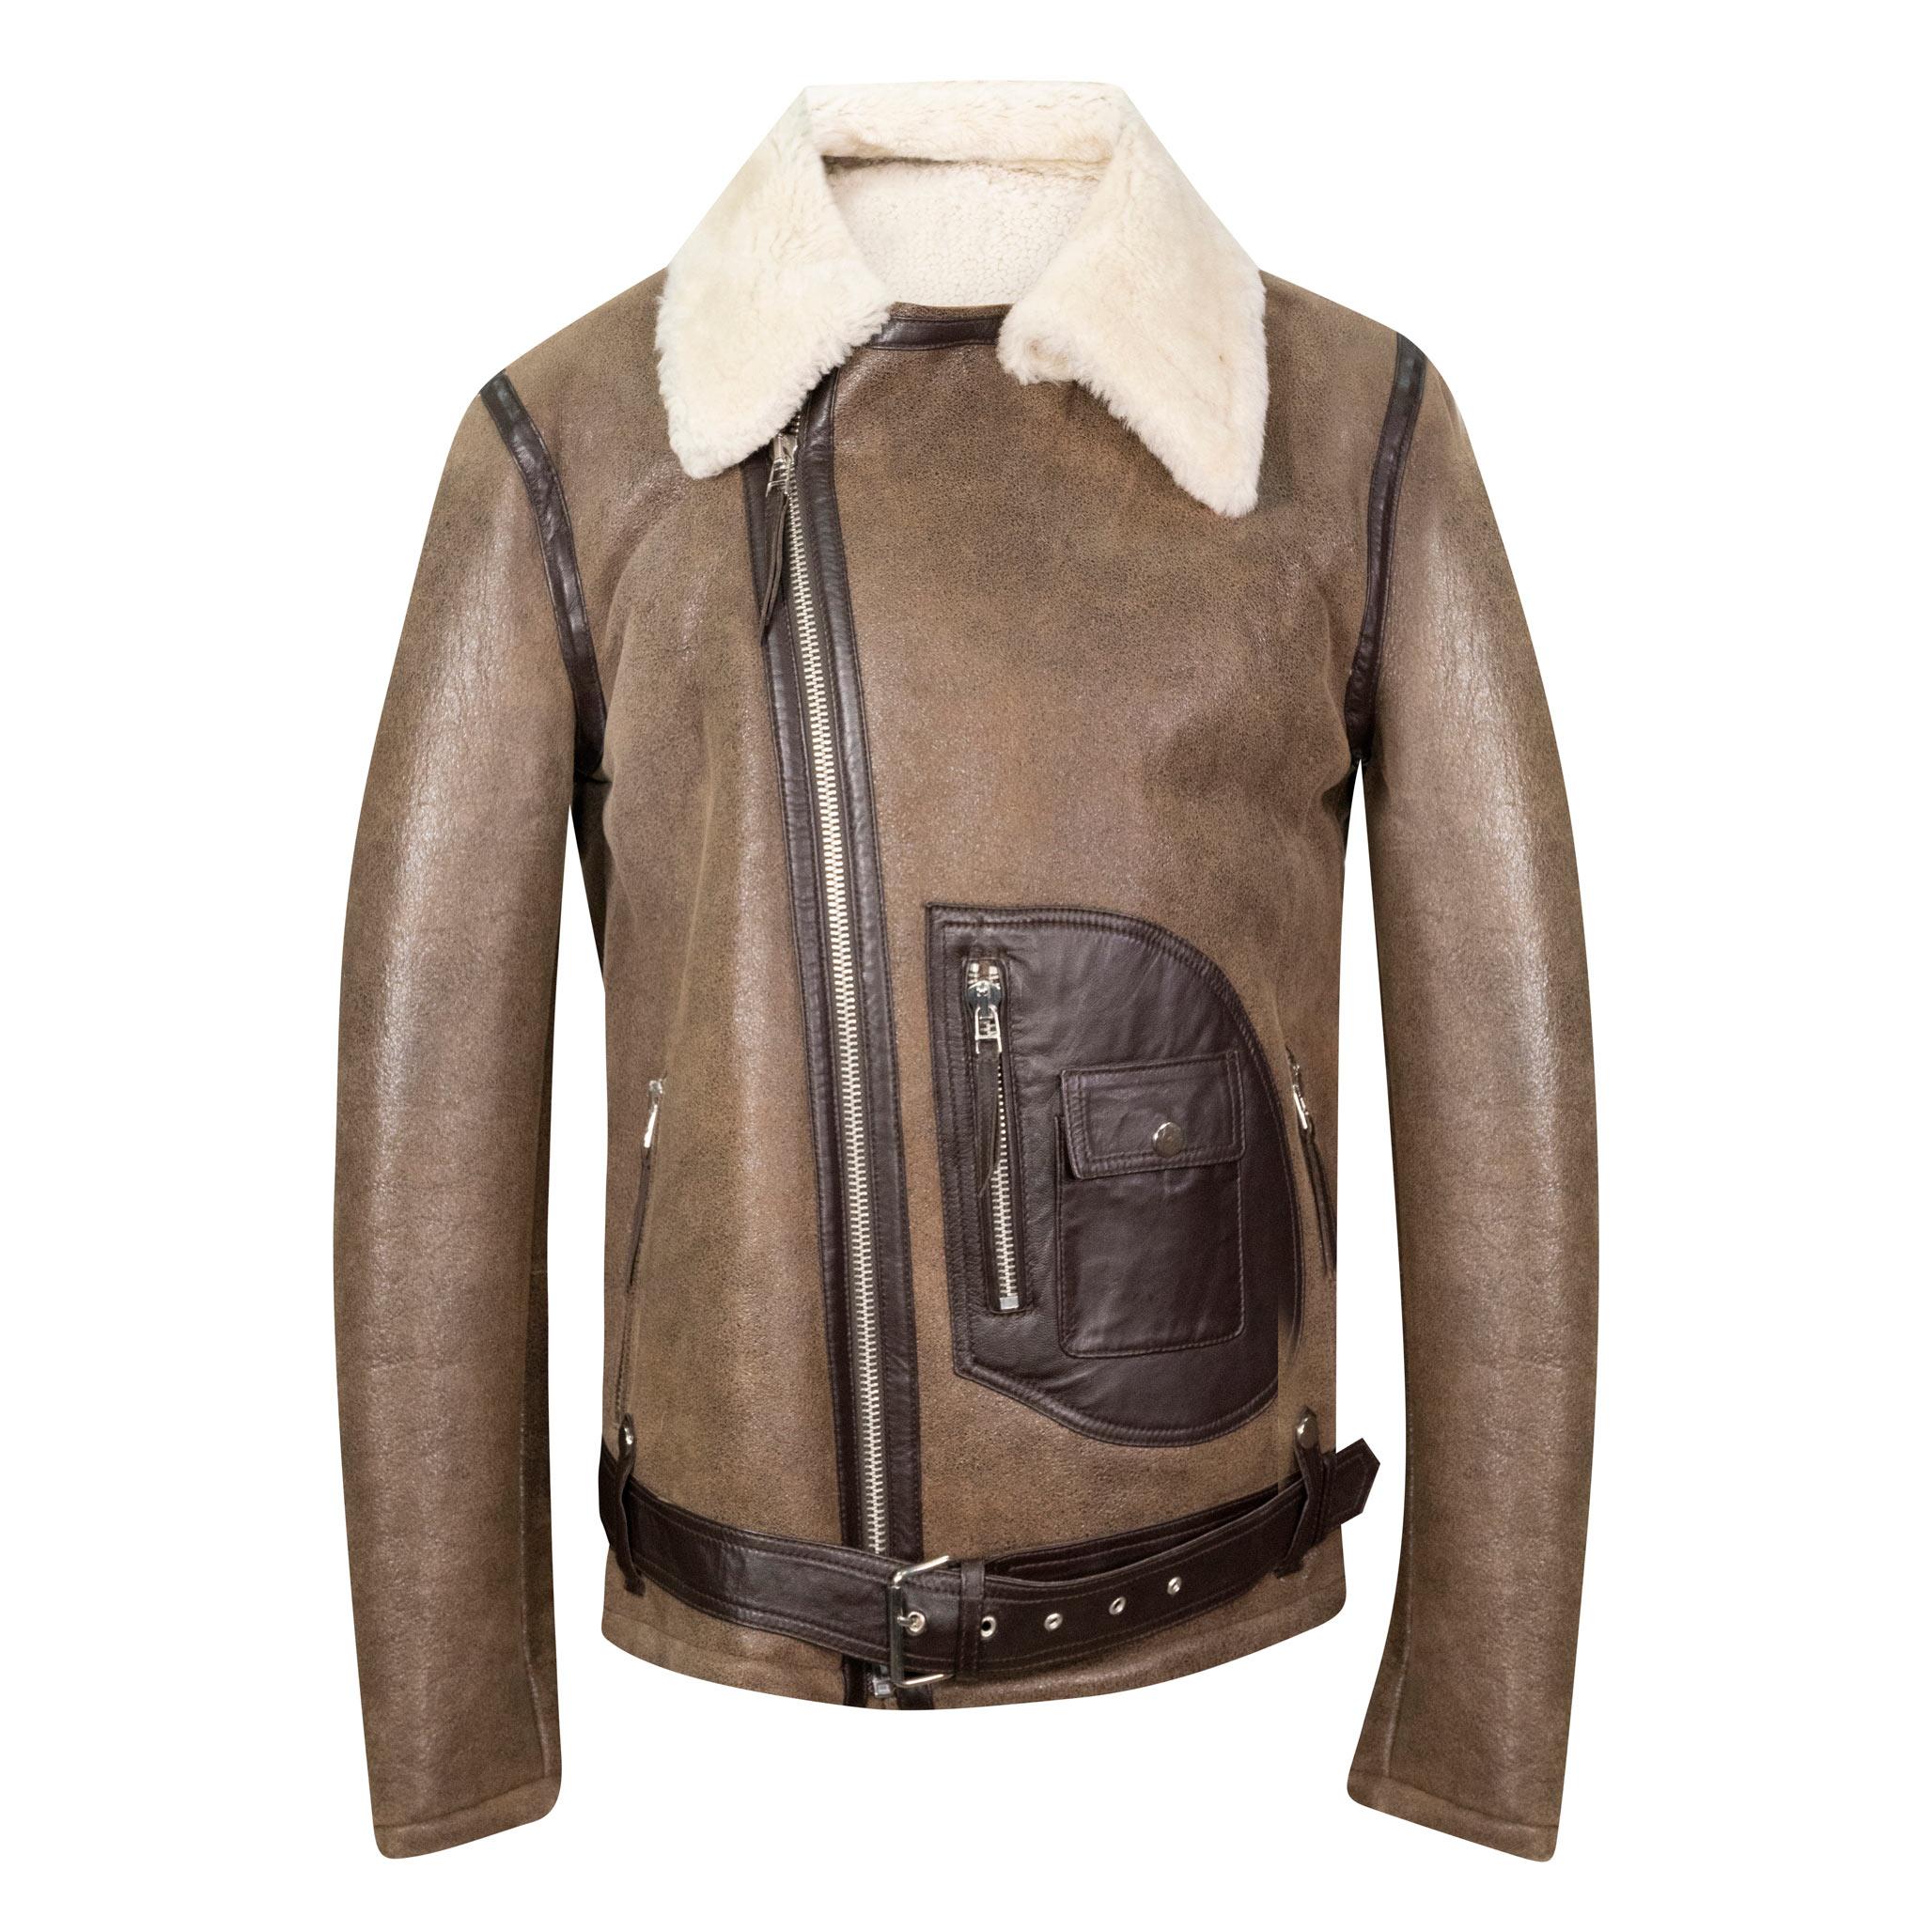 A stylish looking sheepskin biker jacket in tan. The front fastening is double breasted for a more snug fit.